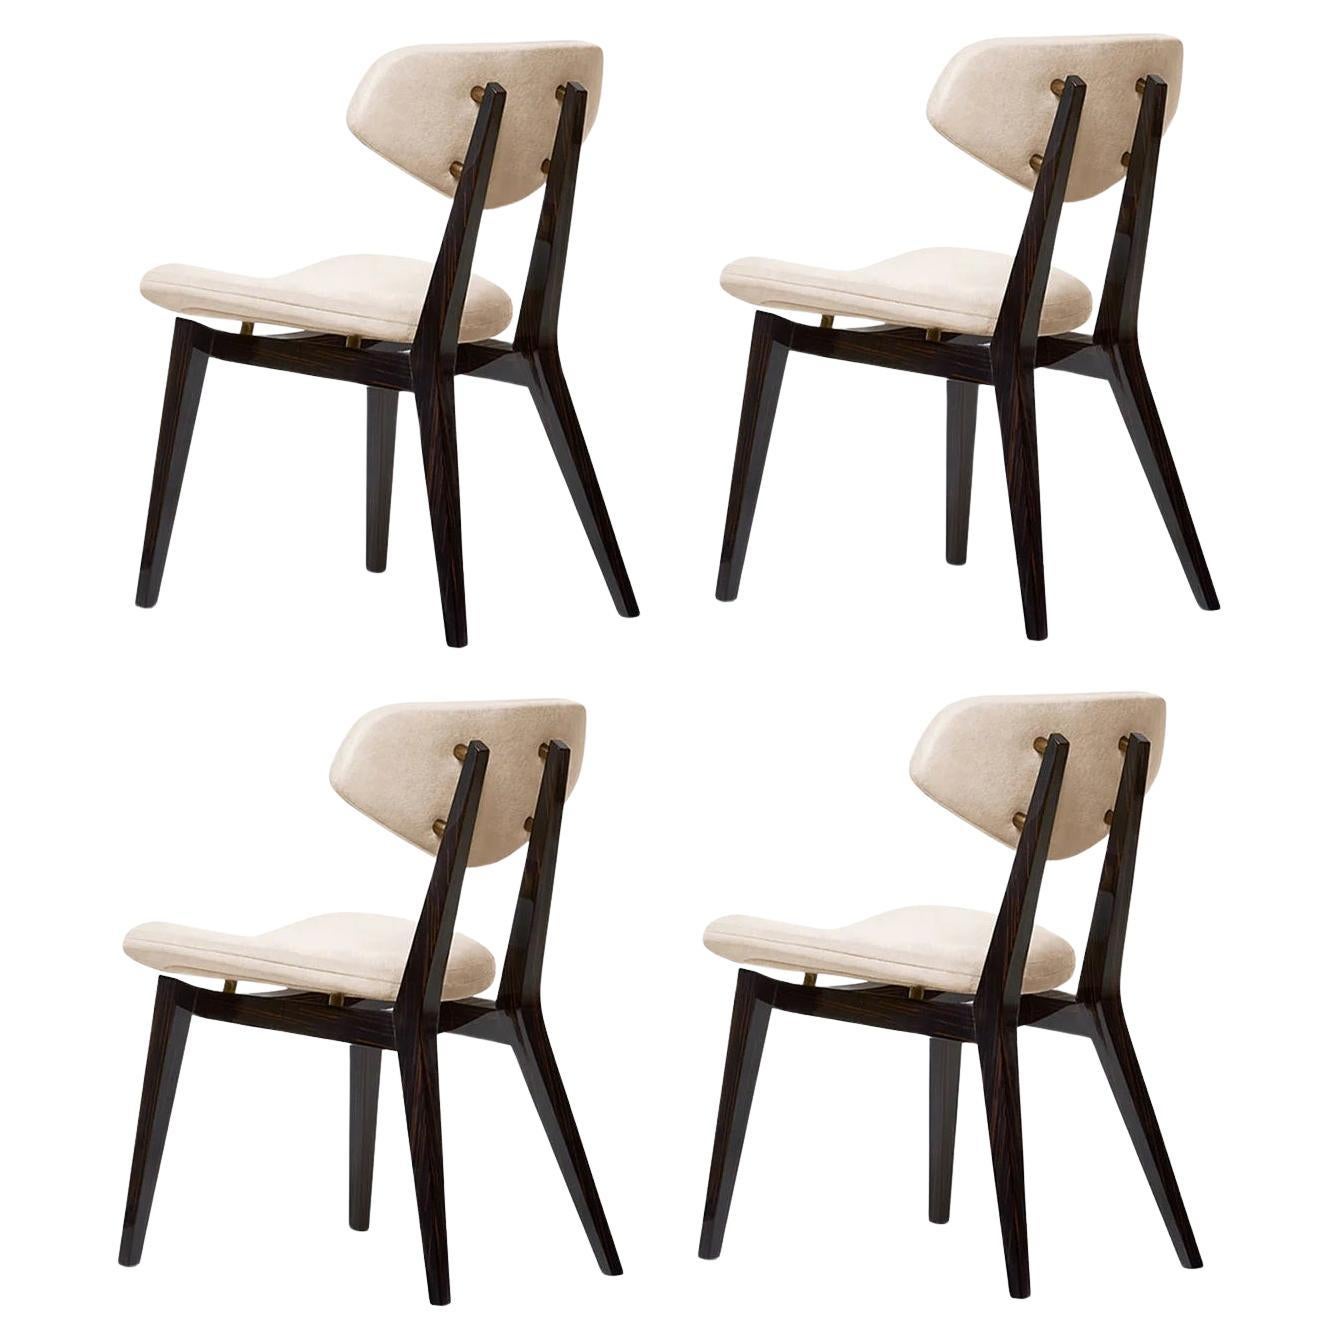 Set of 4 Customizable Retro Style Dining Chairs